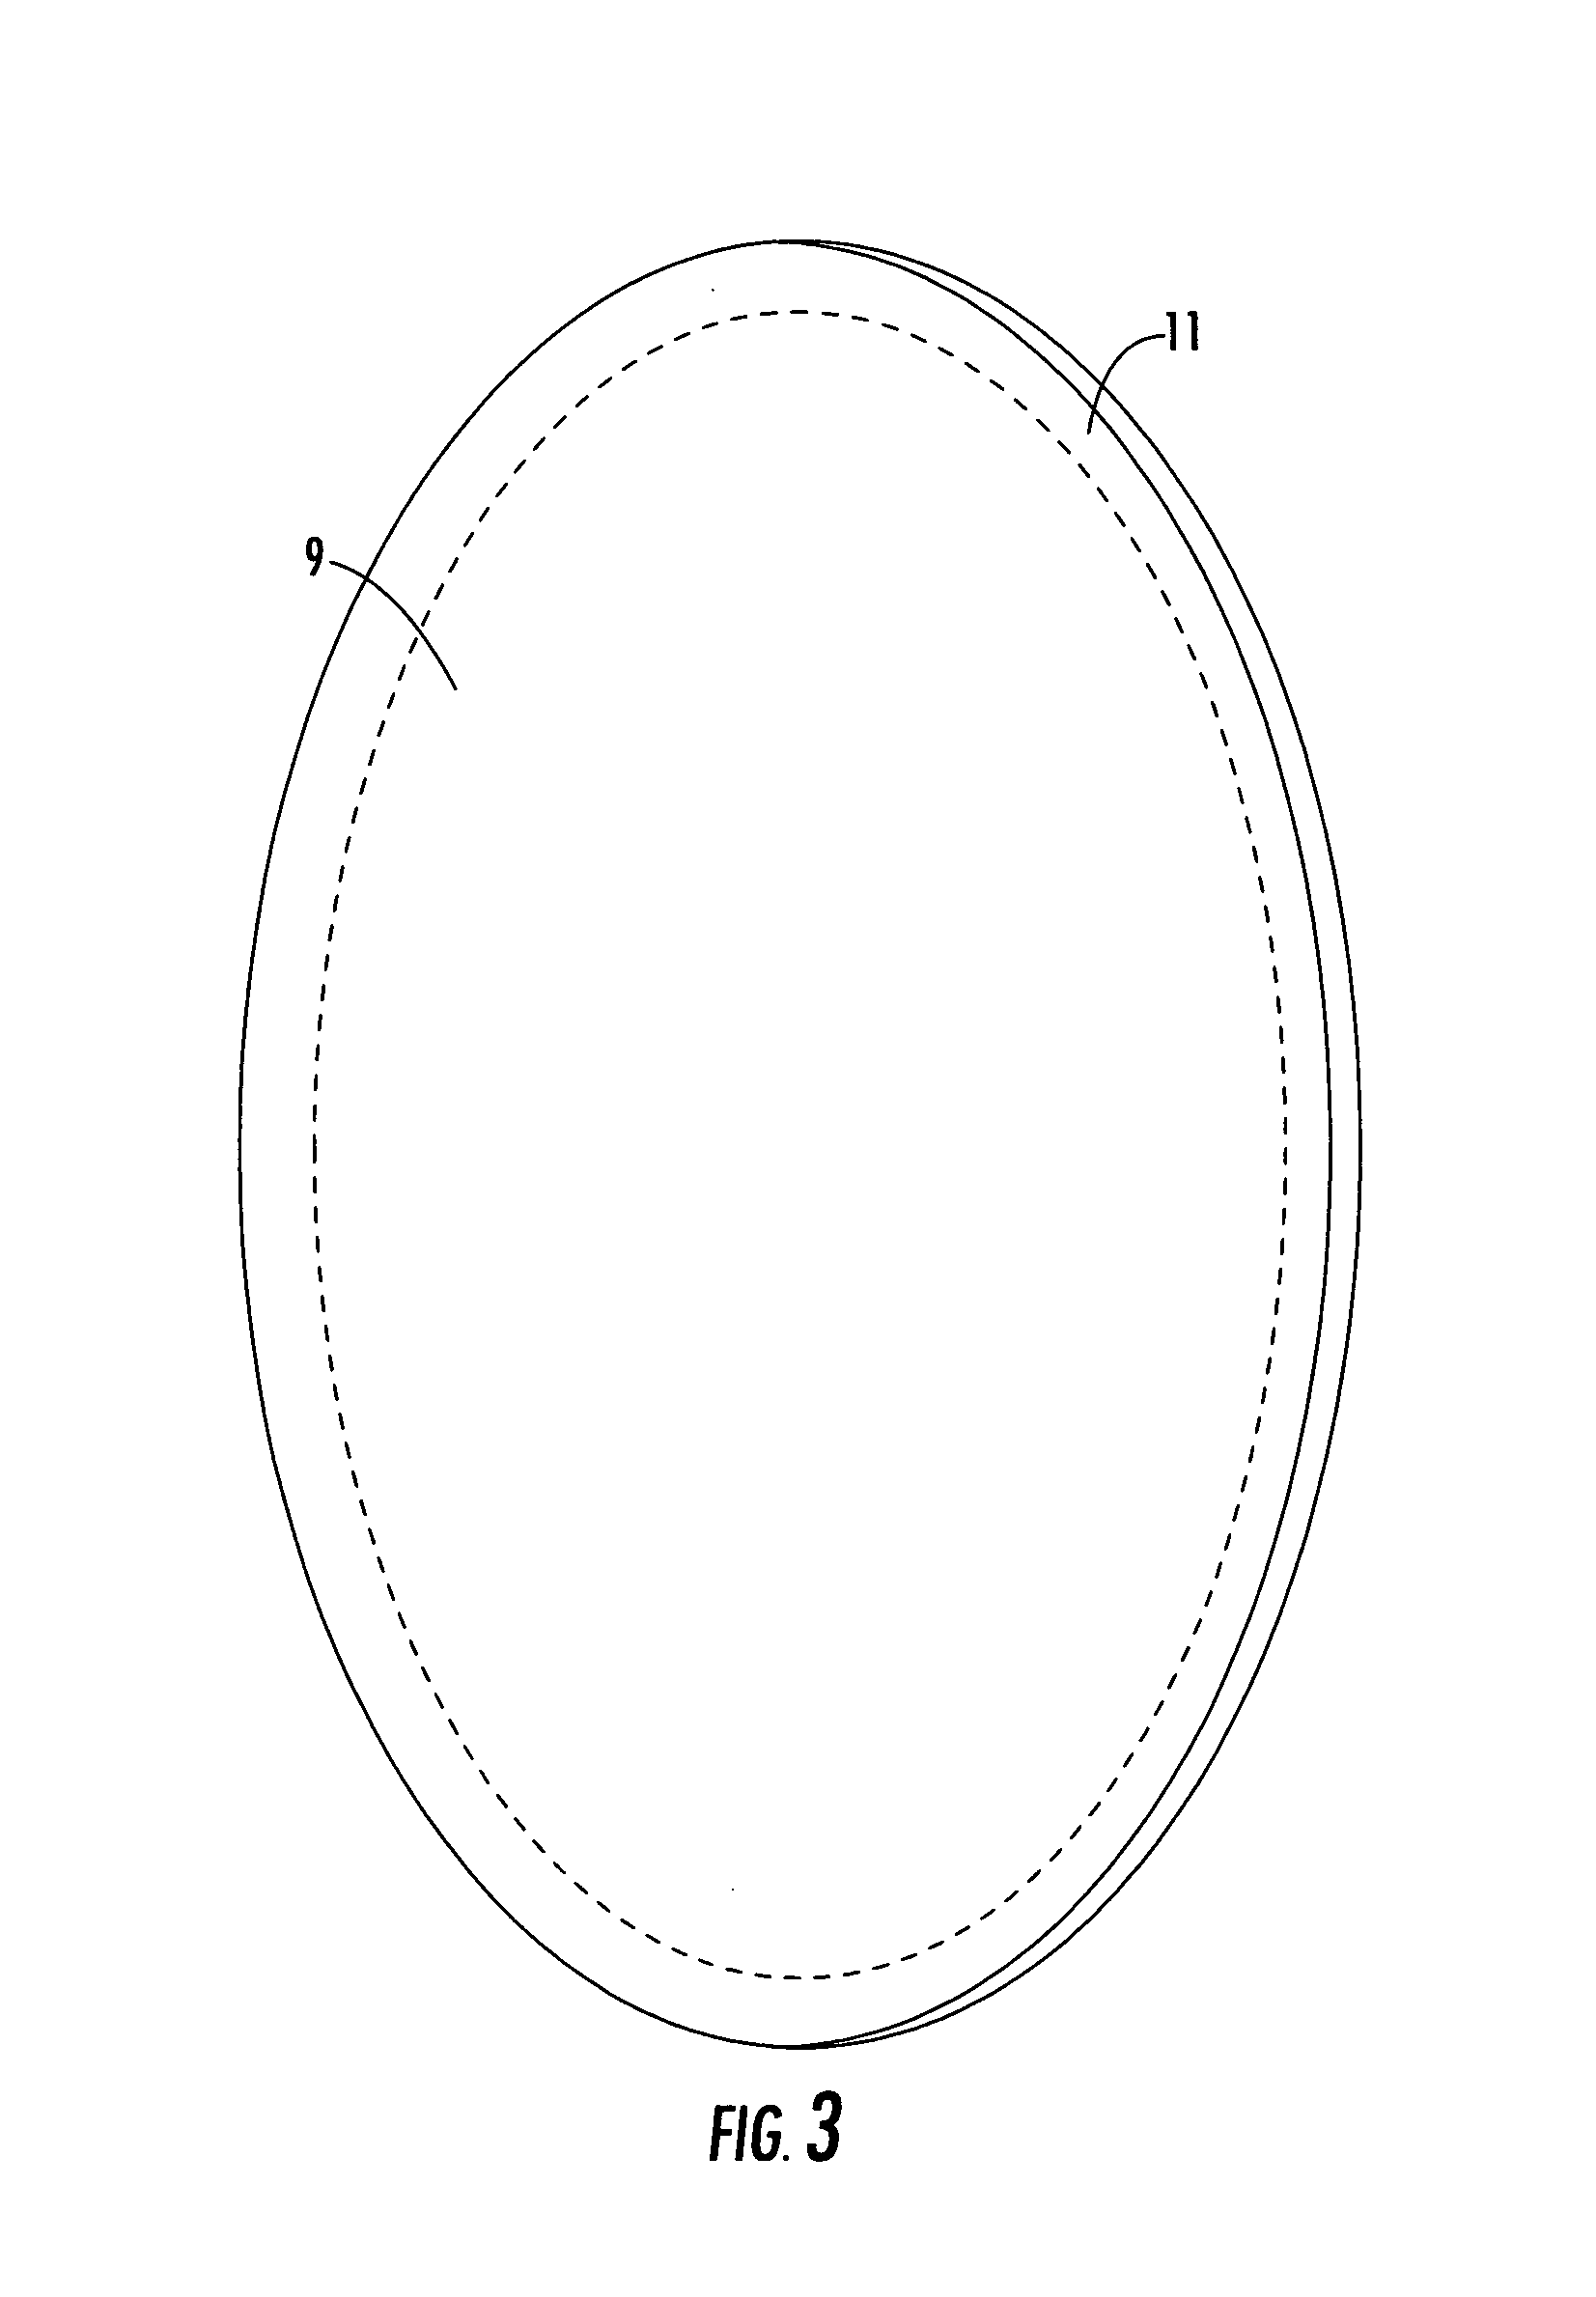 Reflector antenna radome with backlobe suppressor ring and method of manufacturing